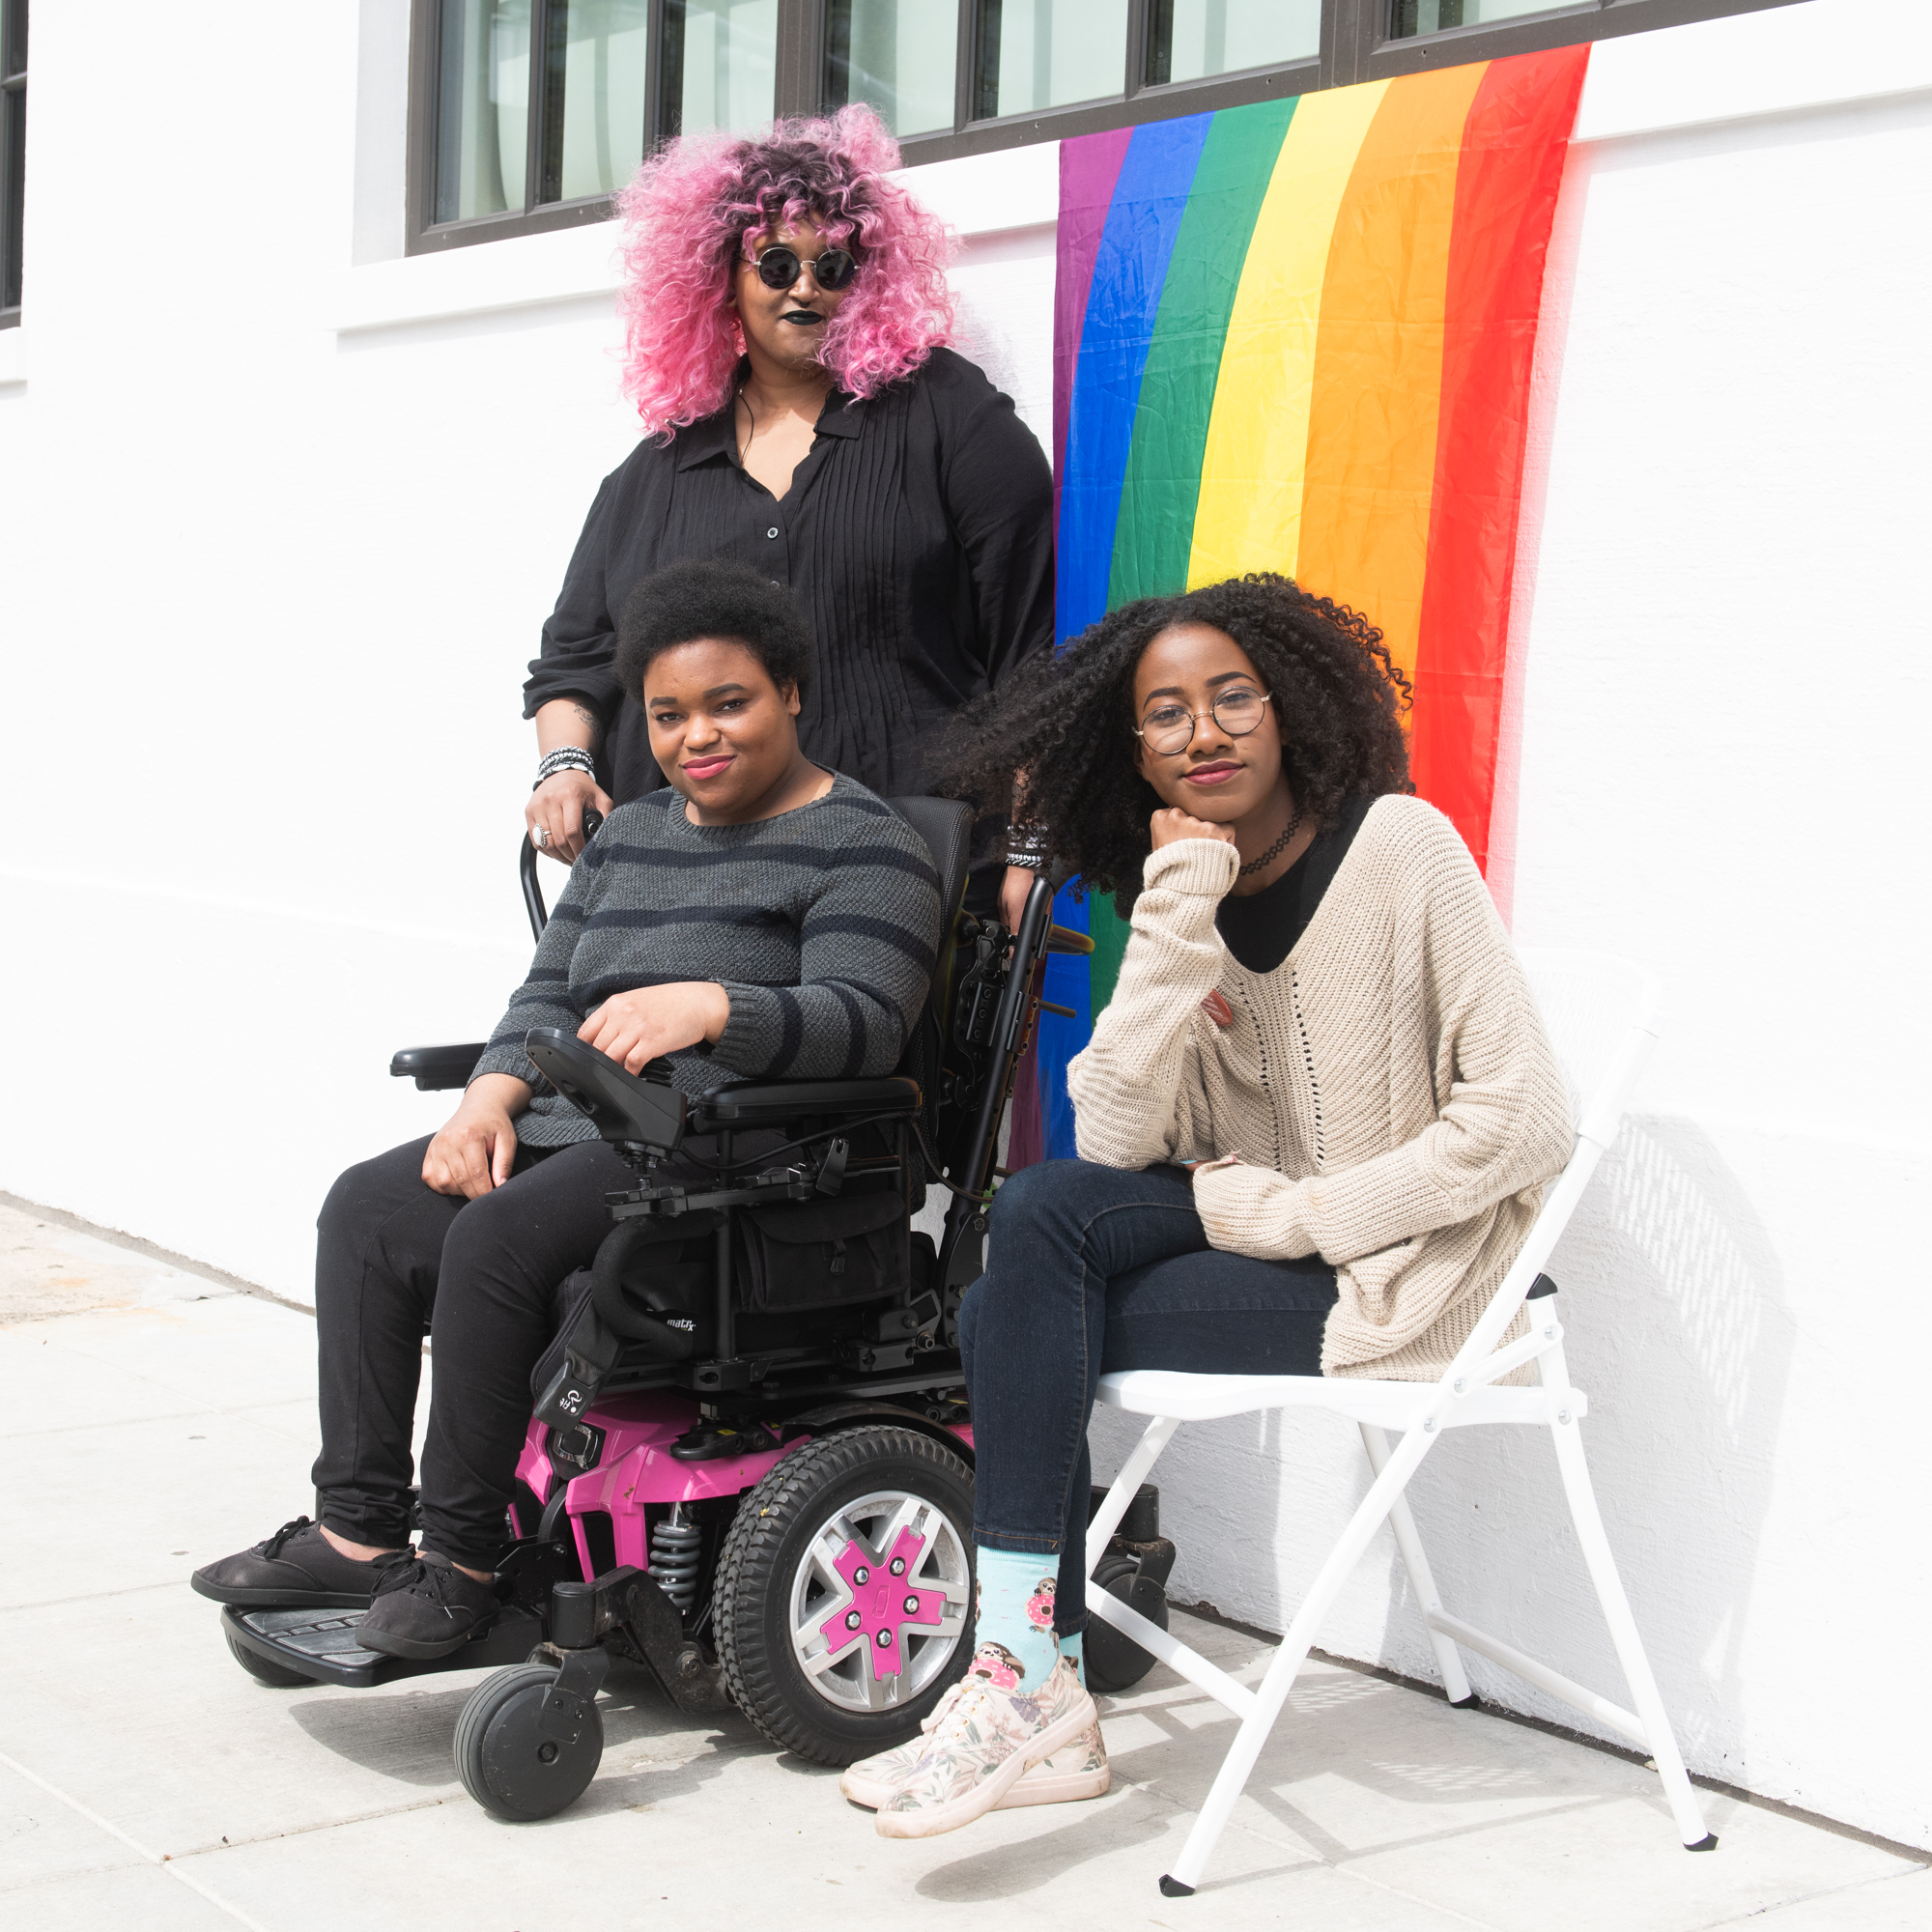 Three BIPOC people are smiling at the camera; 1 stands with a cane, another sits in a chair, and another sits in a wheelchair.